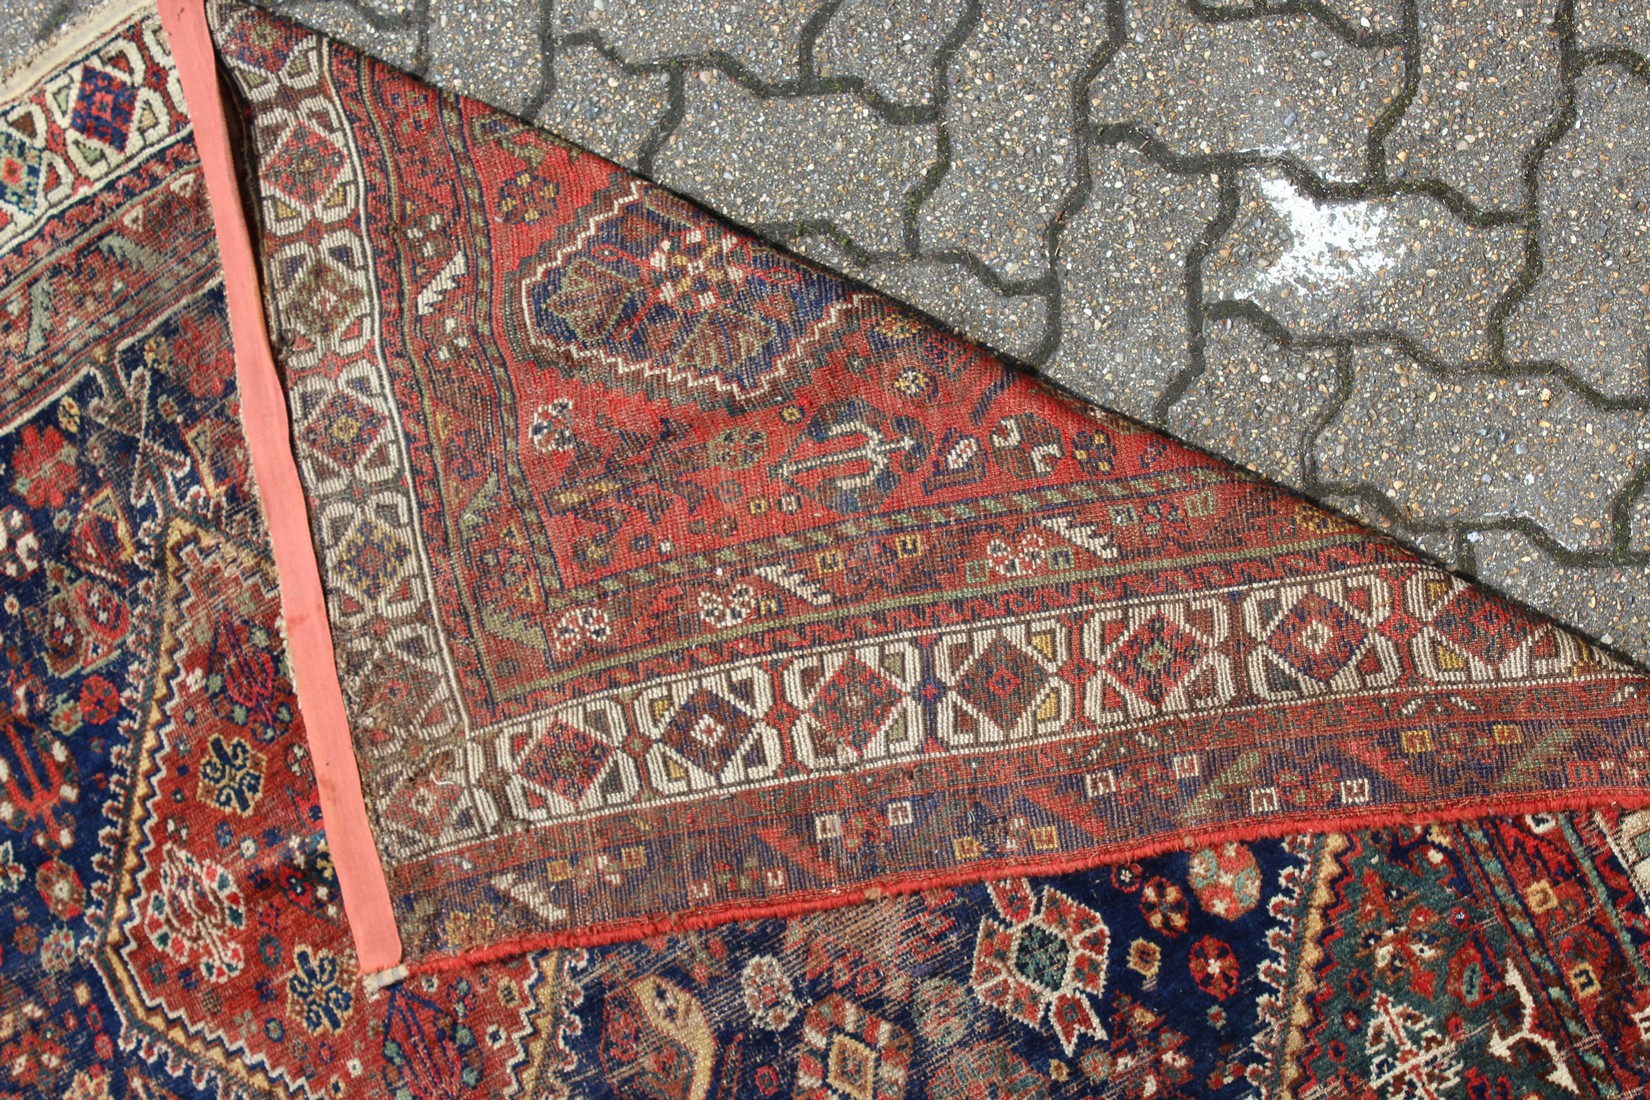 A PERSIAN CARPET with three large diamond design, in red and blue. 9ft long x 6ft 10ins wide. - Image 2 of 2